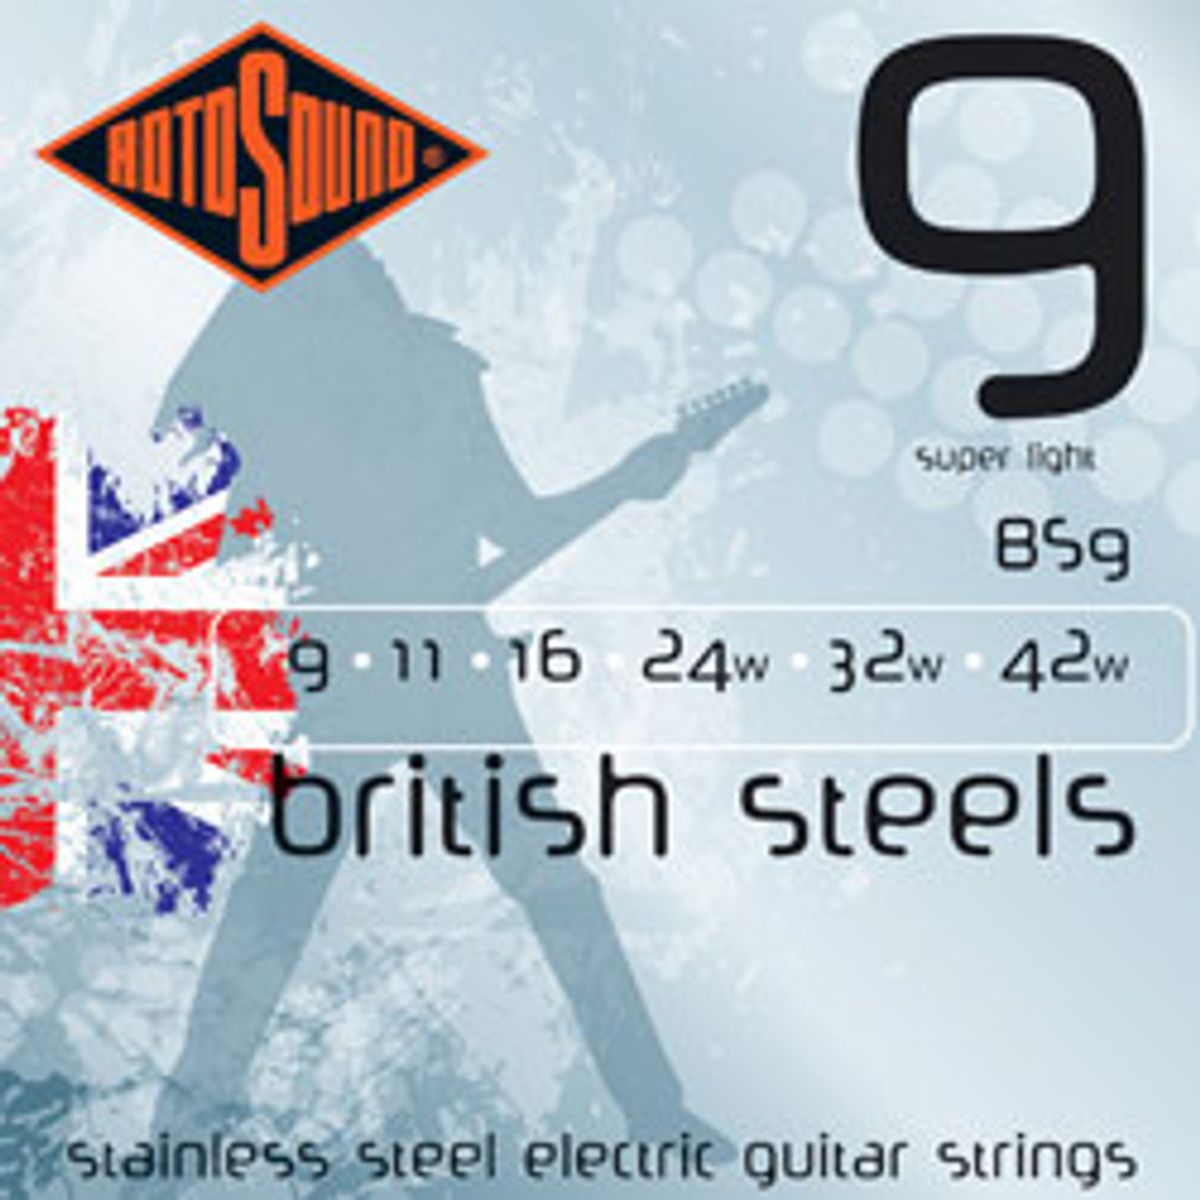 Rotosound Launches British Steel Strings